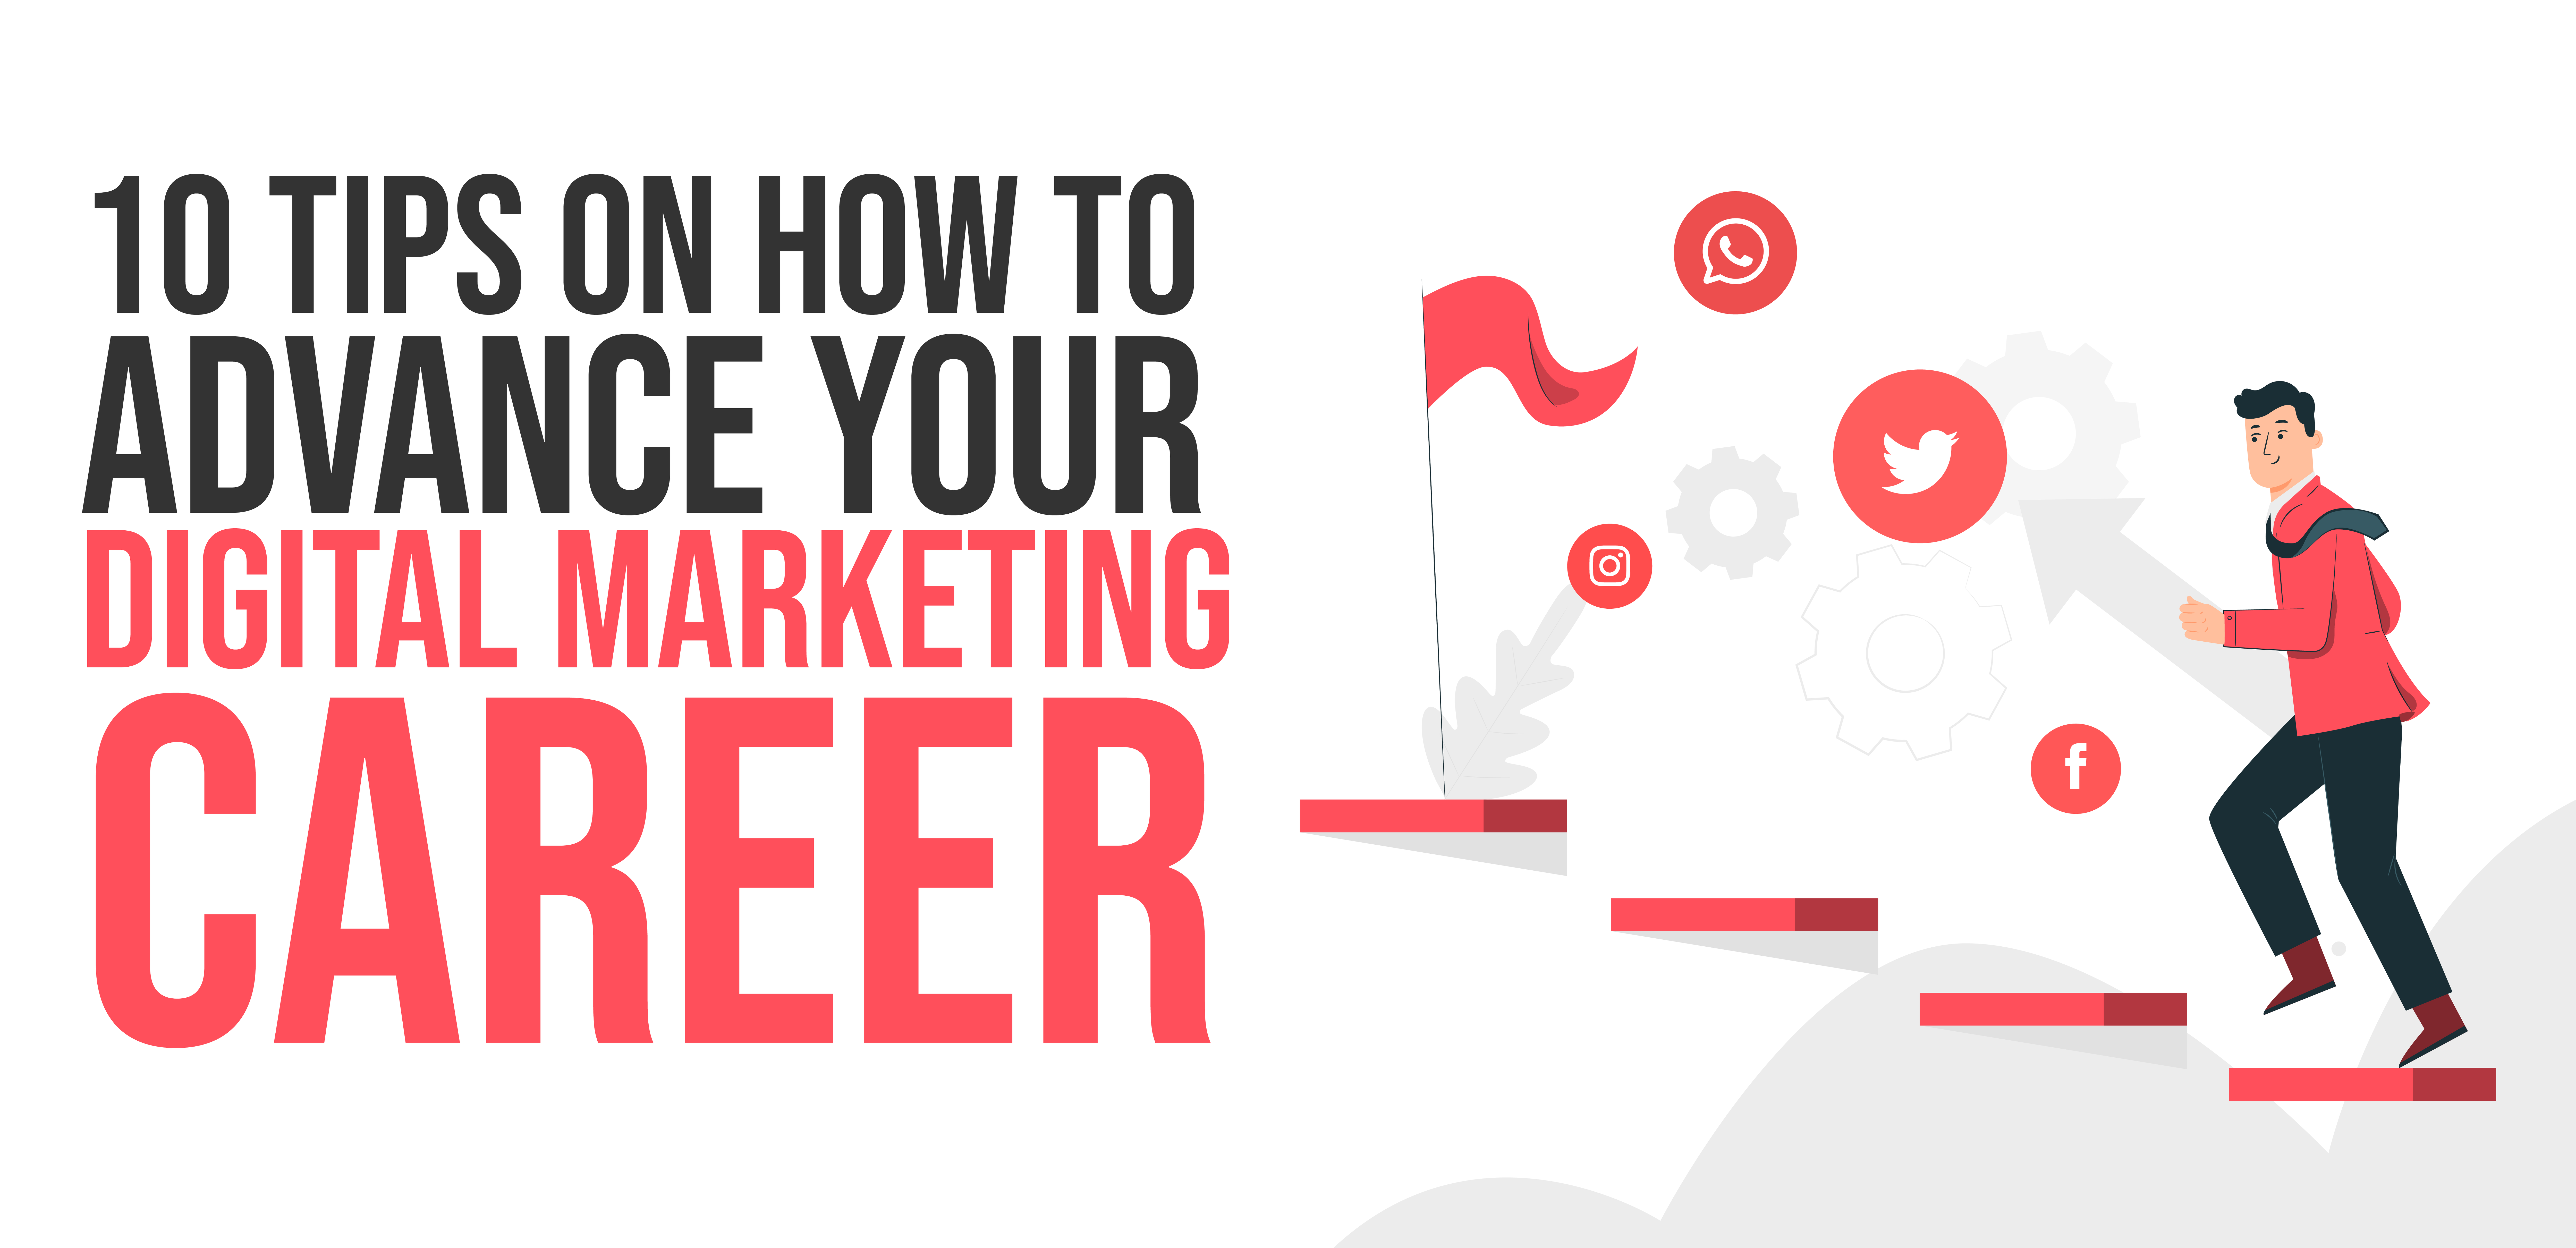 10 Tips on How to Advance Your Digital Marketing Career